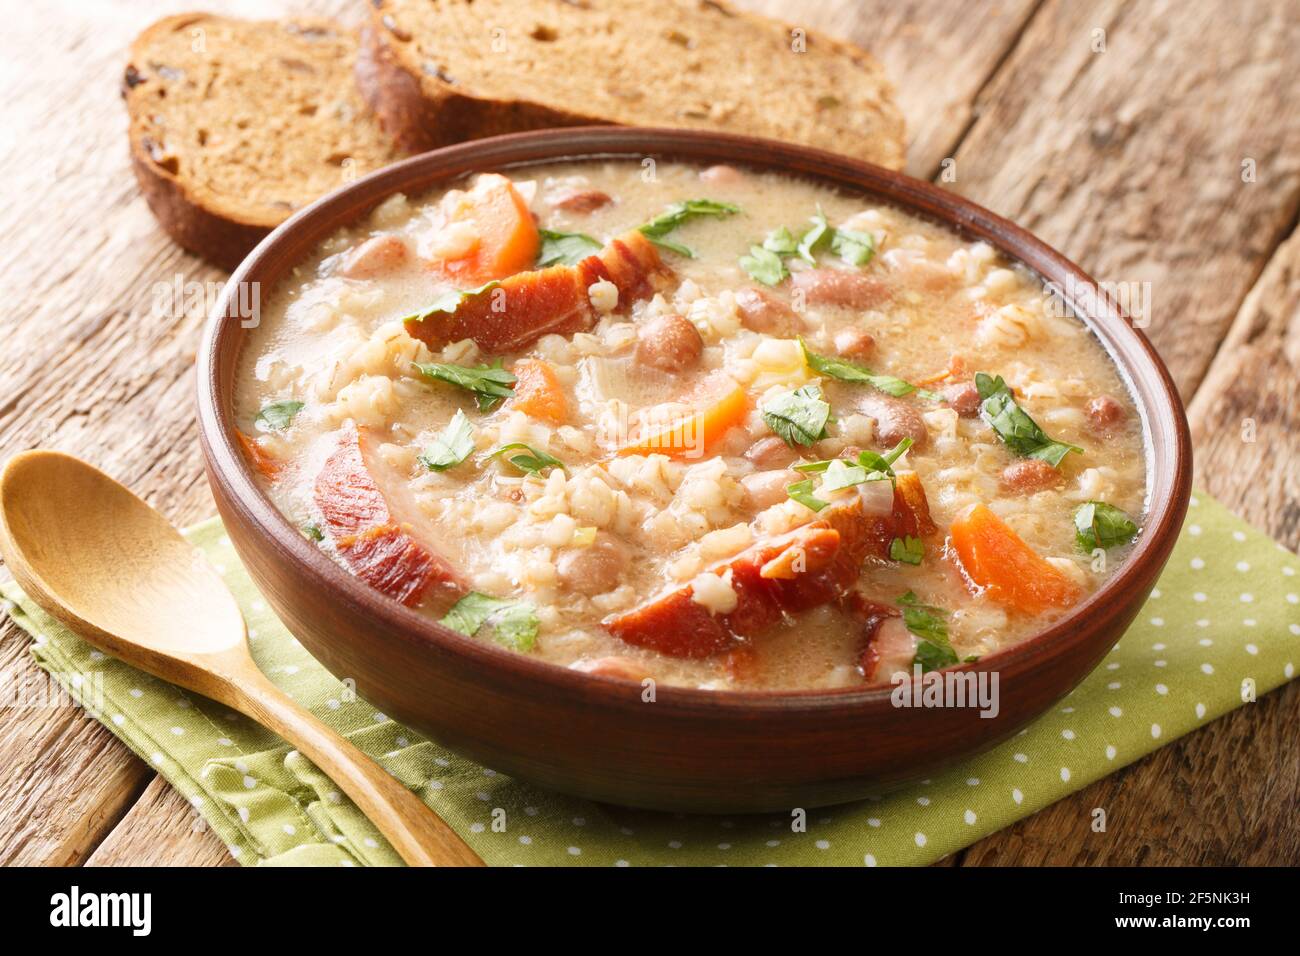 Slovenian Meat and Vegetable Barley Soup Ricet close-up in a bowl on the table. Horizontal Stock Photo